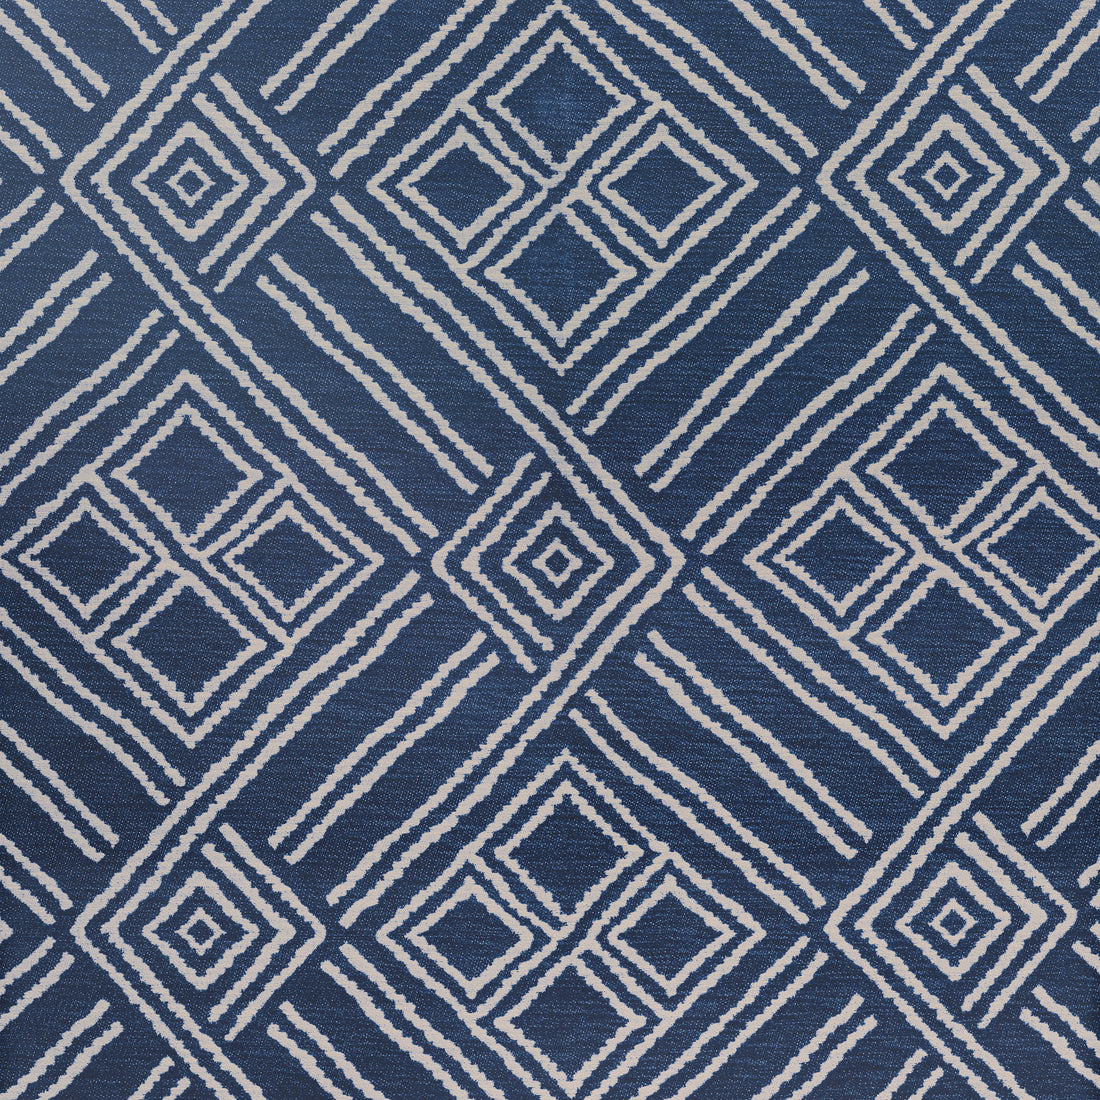 Terraza fabric in navy color - pattern number W8607 - by Thibaut in the Villa collection